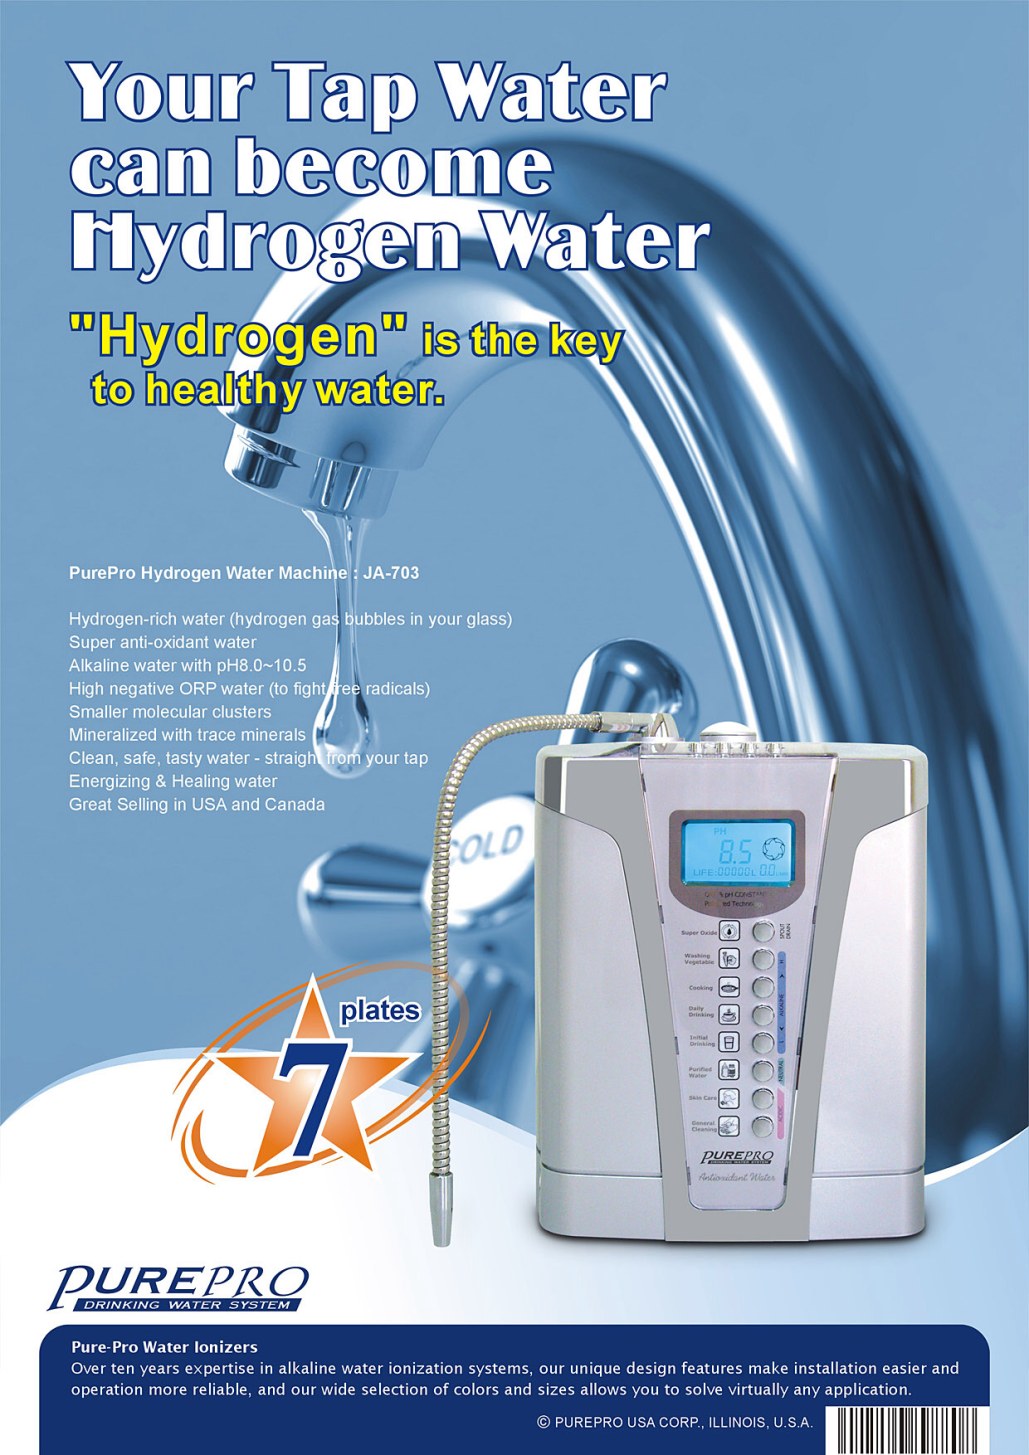 Hydrogen-rich water (hydrogen gas bubbles in your glass), Super anti-oxidant water, Alkaline water with pH8.0~10.5, High negative ORP water (to fight free radicals), Smaller molecular clusters, Mineralized with trace minerals, Clean, safe, tasty water - straight from your tap, Energizing & Healing water